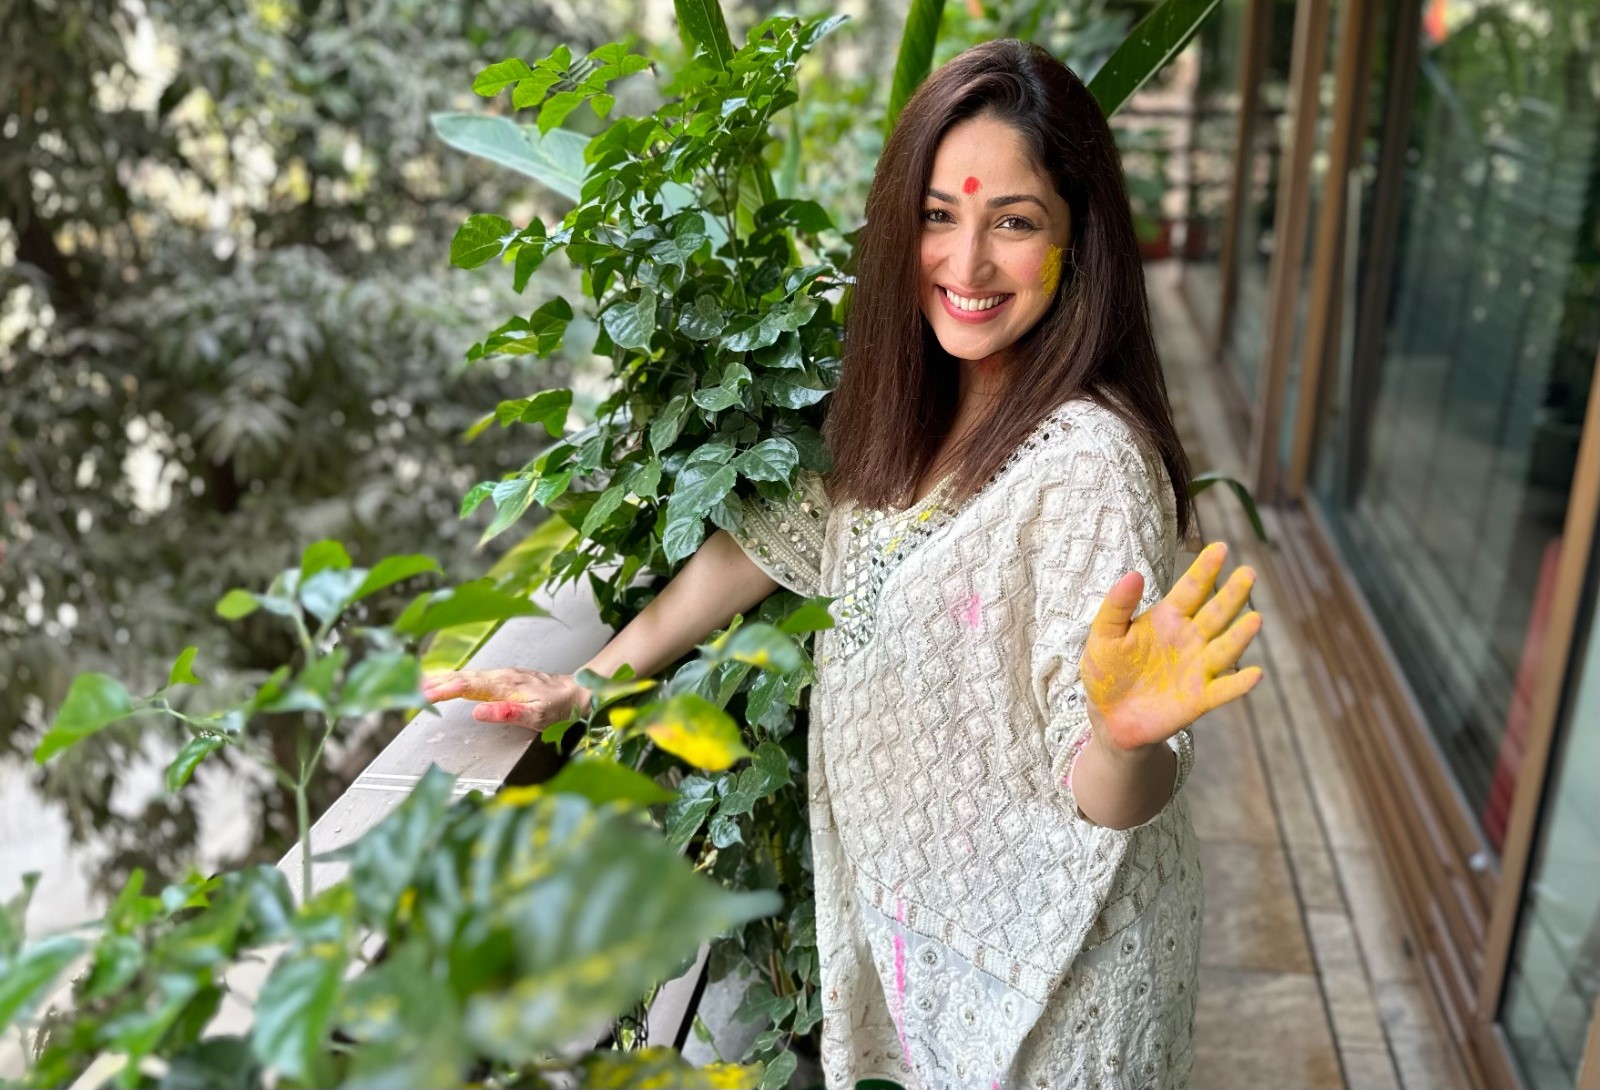 Yami Gautam Dhar is excited to try Maharashtrian delicacies this Holi